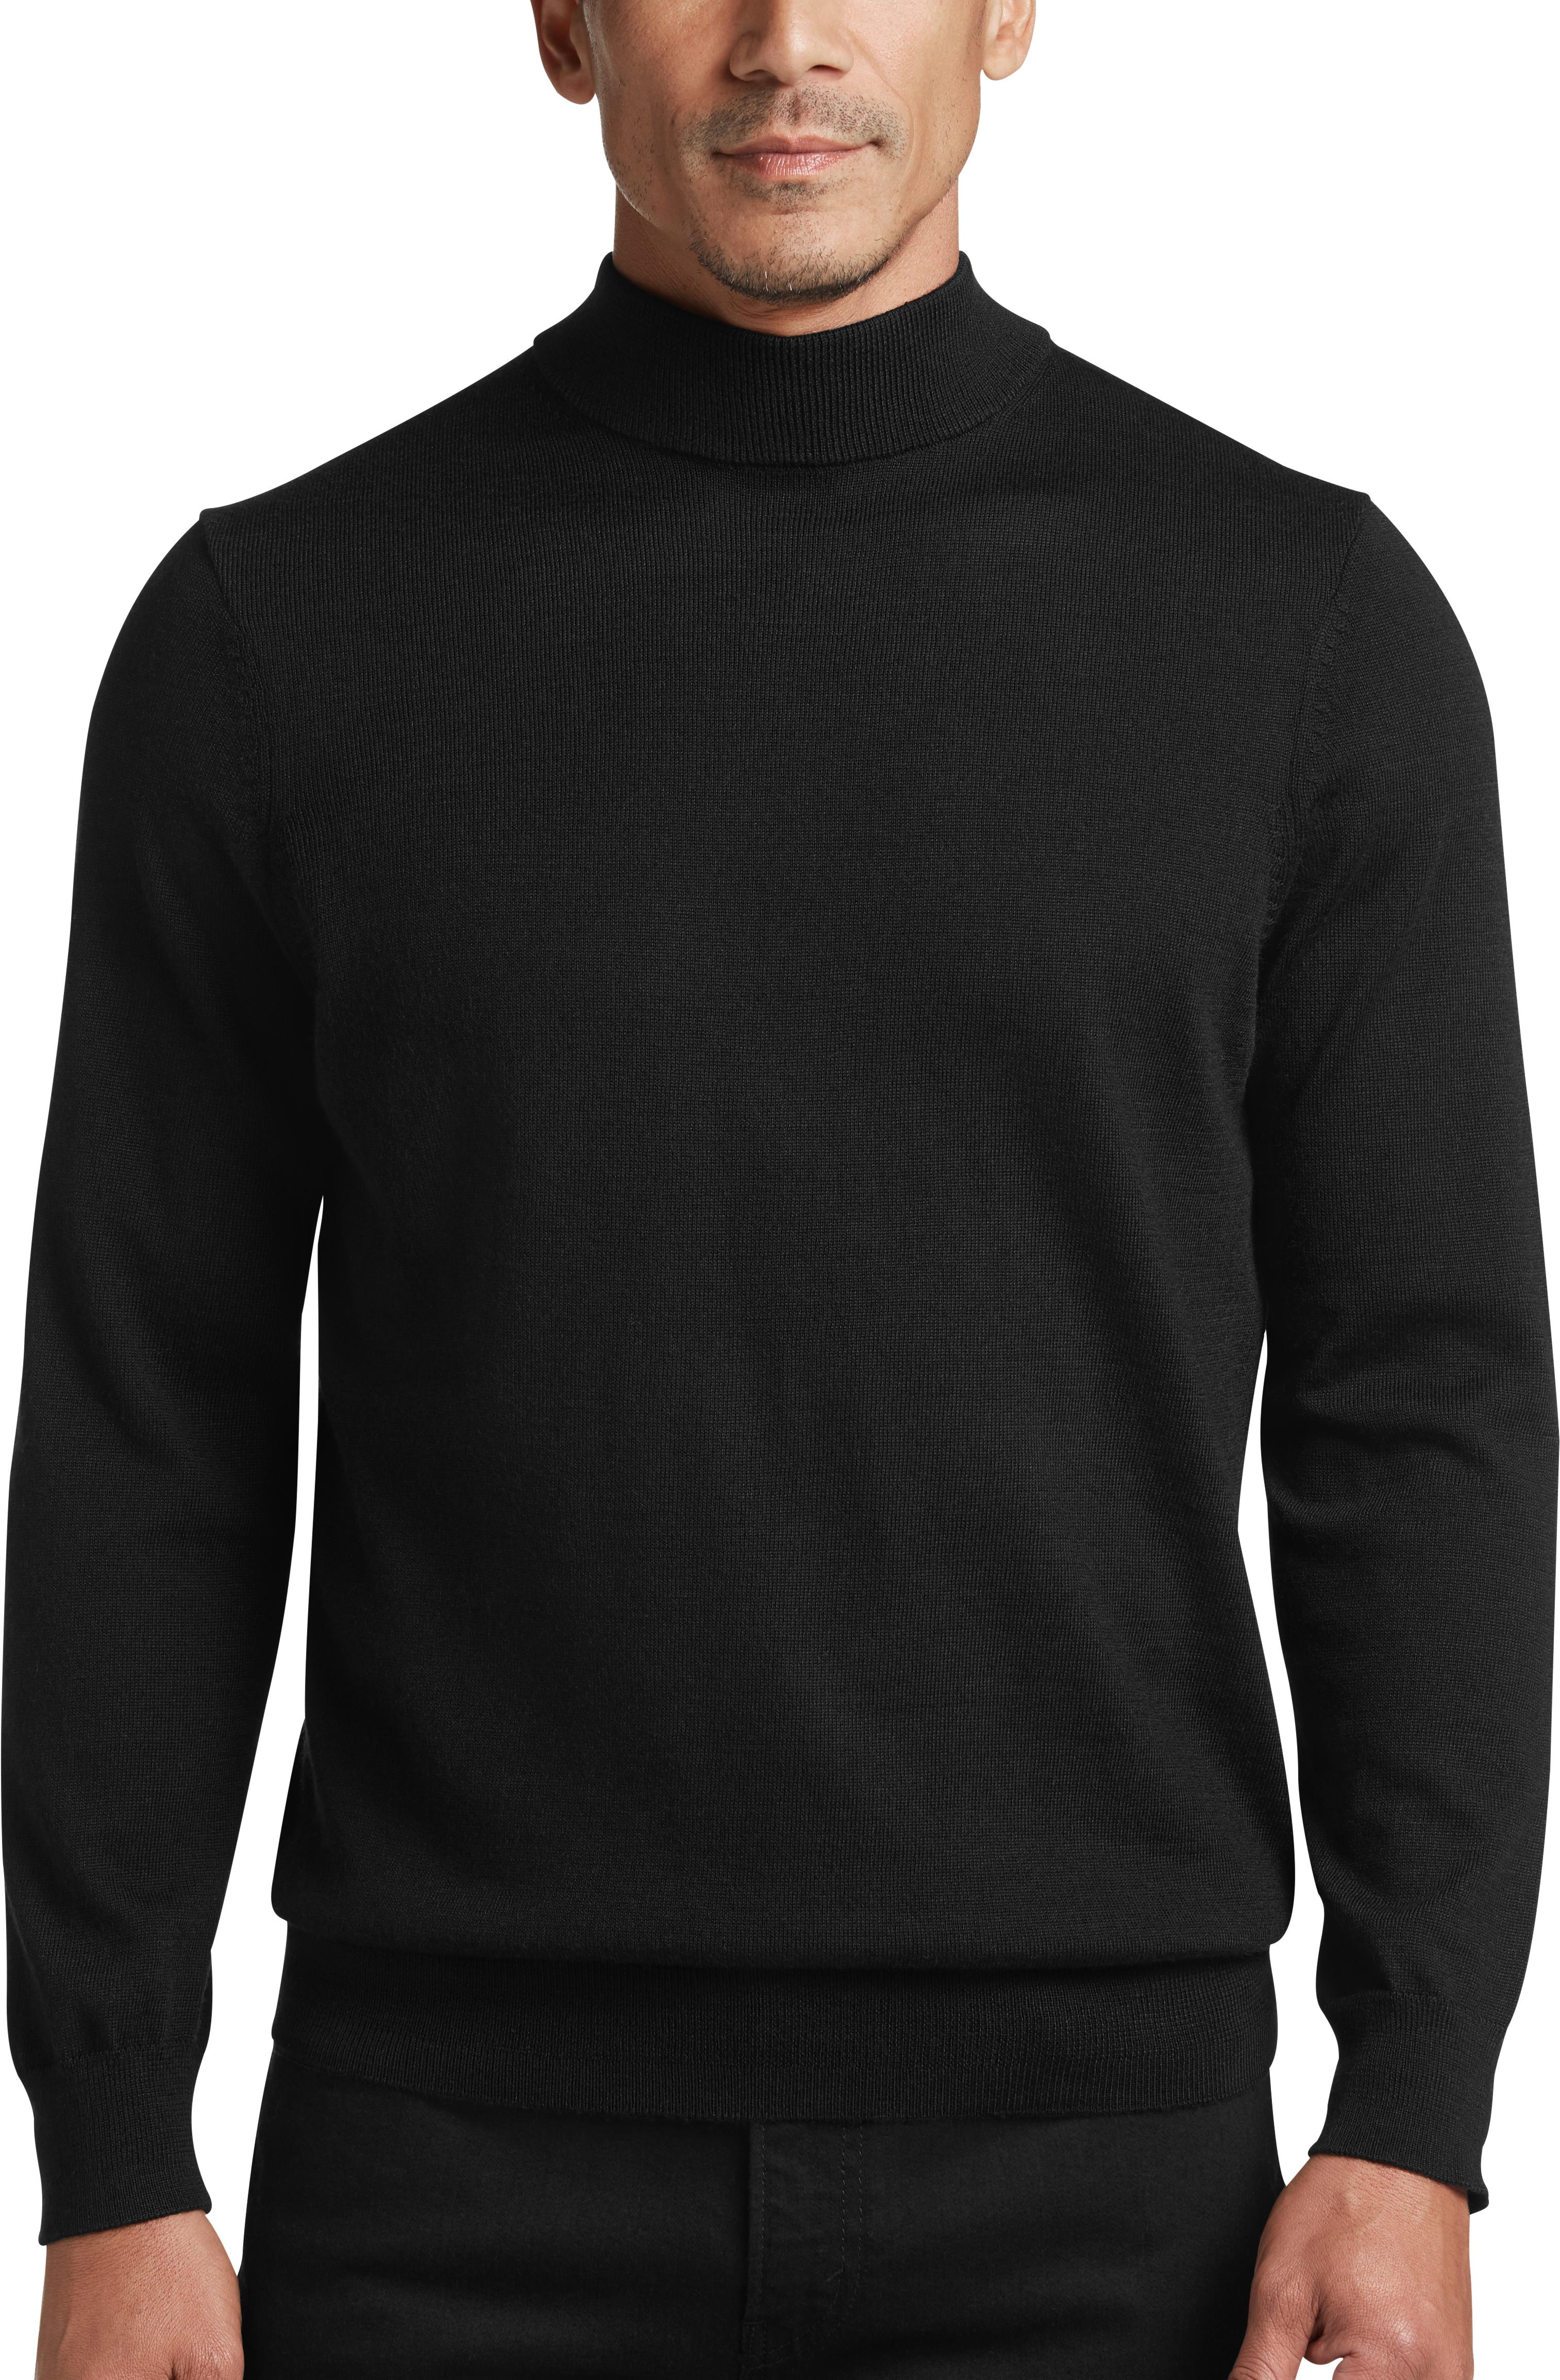 mens mock neck sweaters for sale - For Fine Positioning Podcast Diaporama